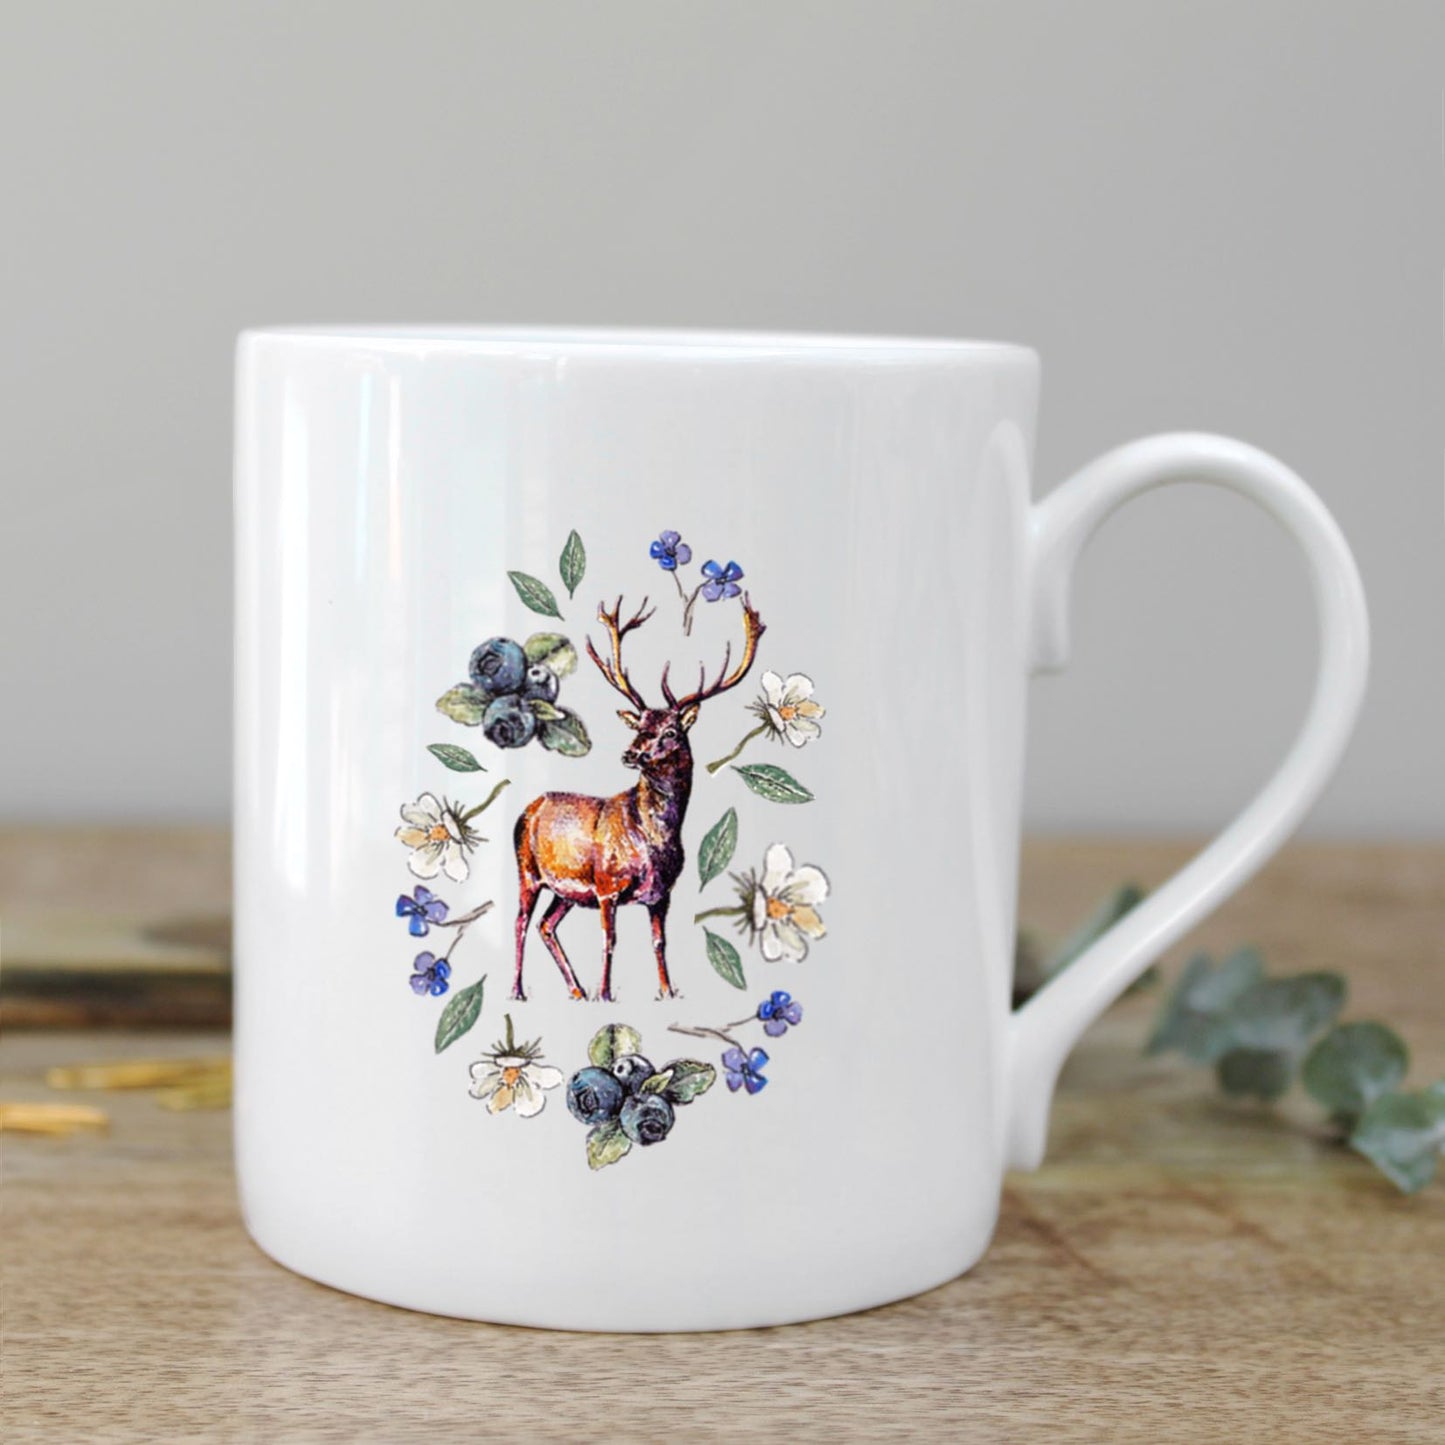 Woodland Creatures Stag Mug in a Gift Box - The Tulip Tree Chiddingstone